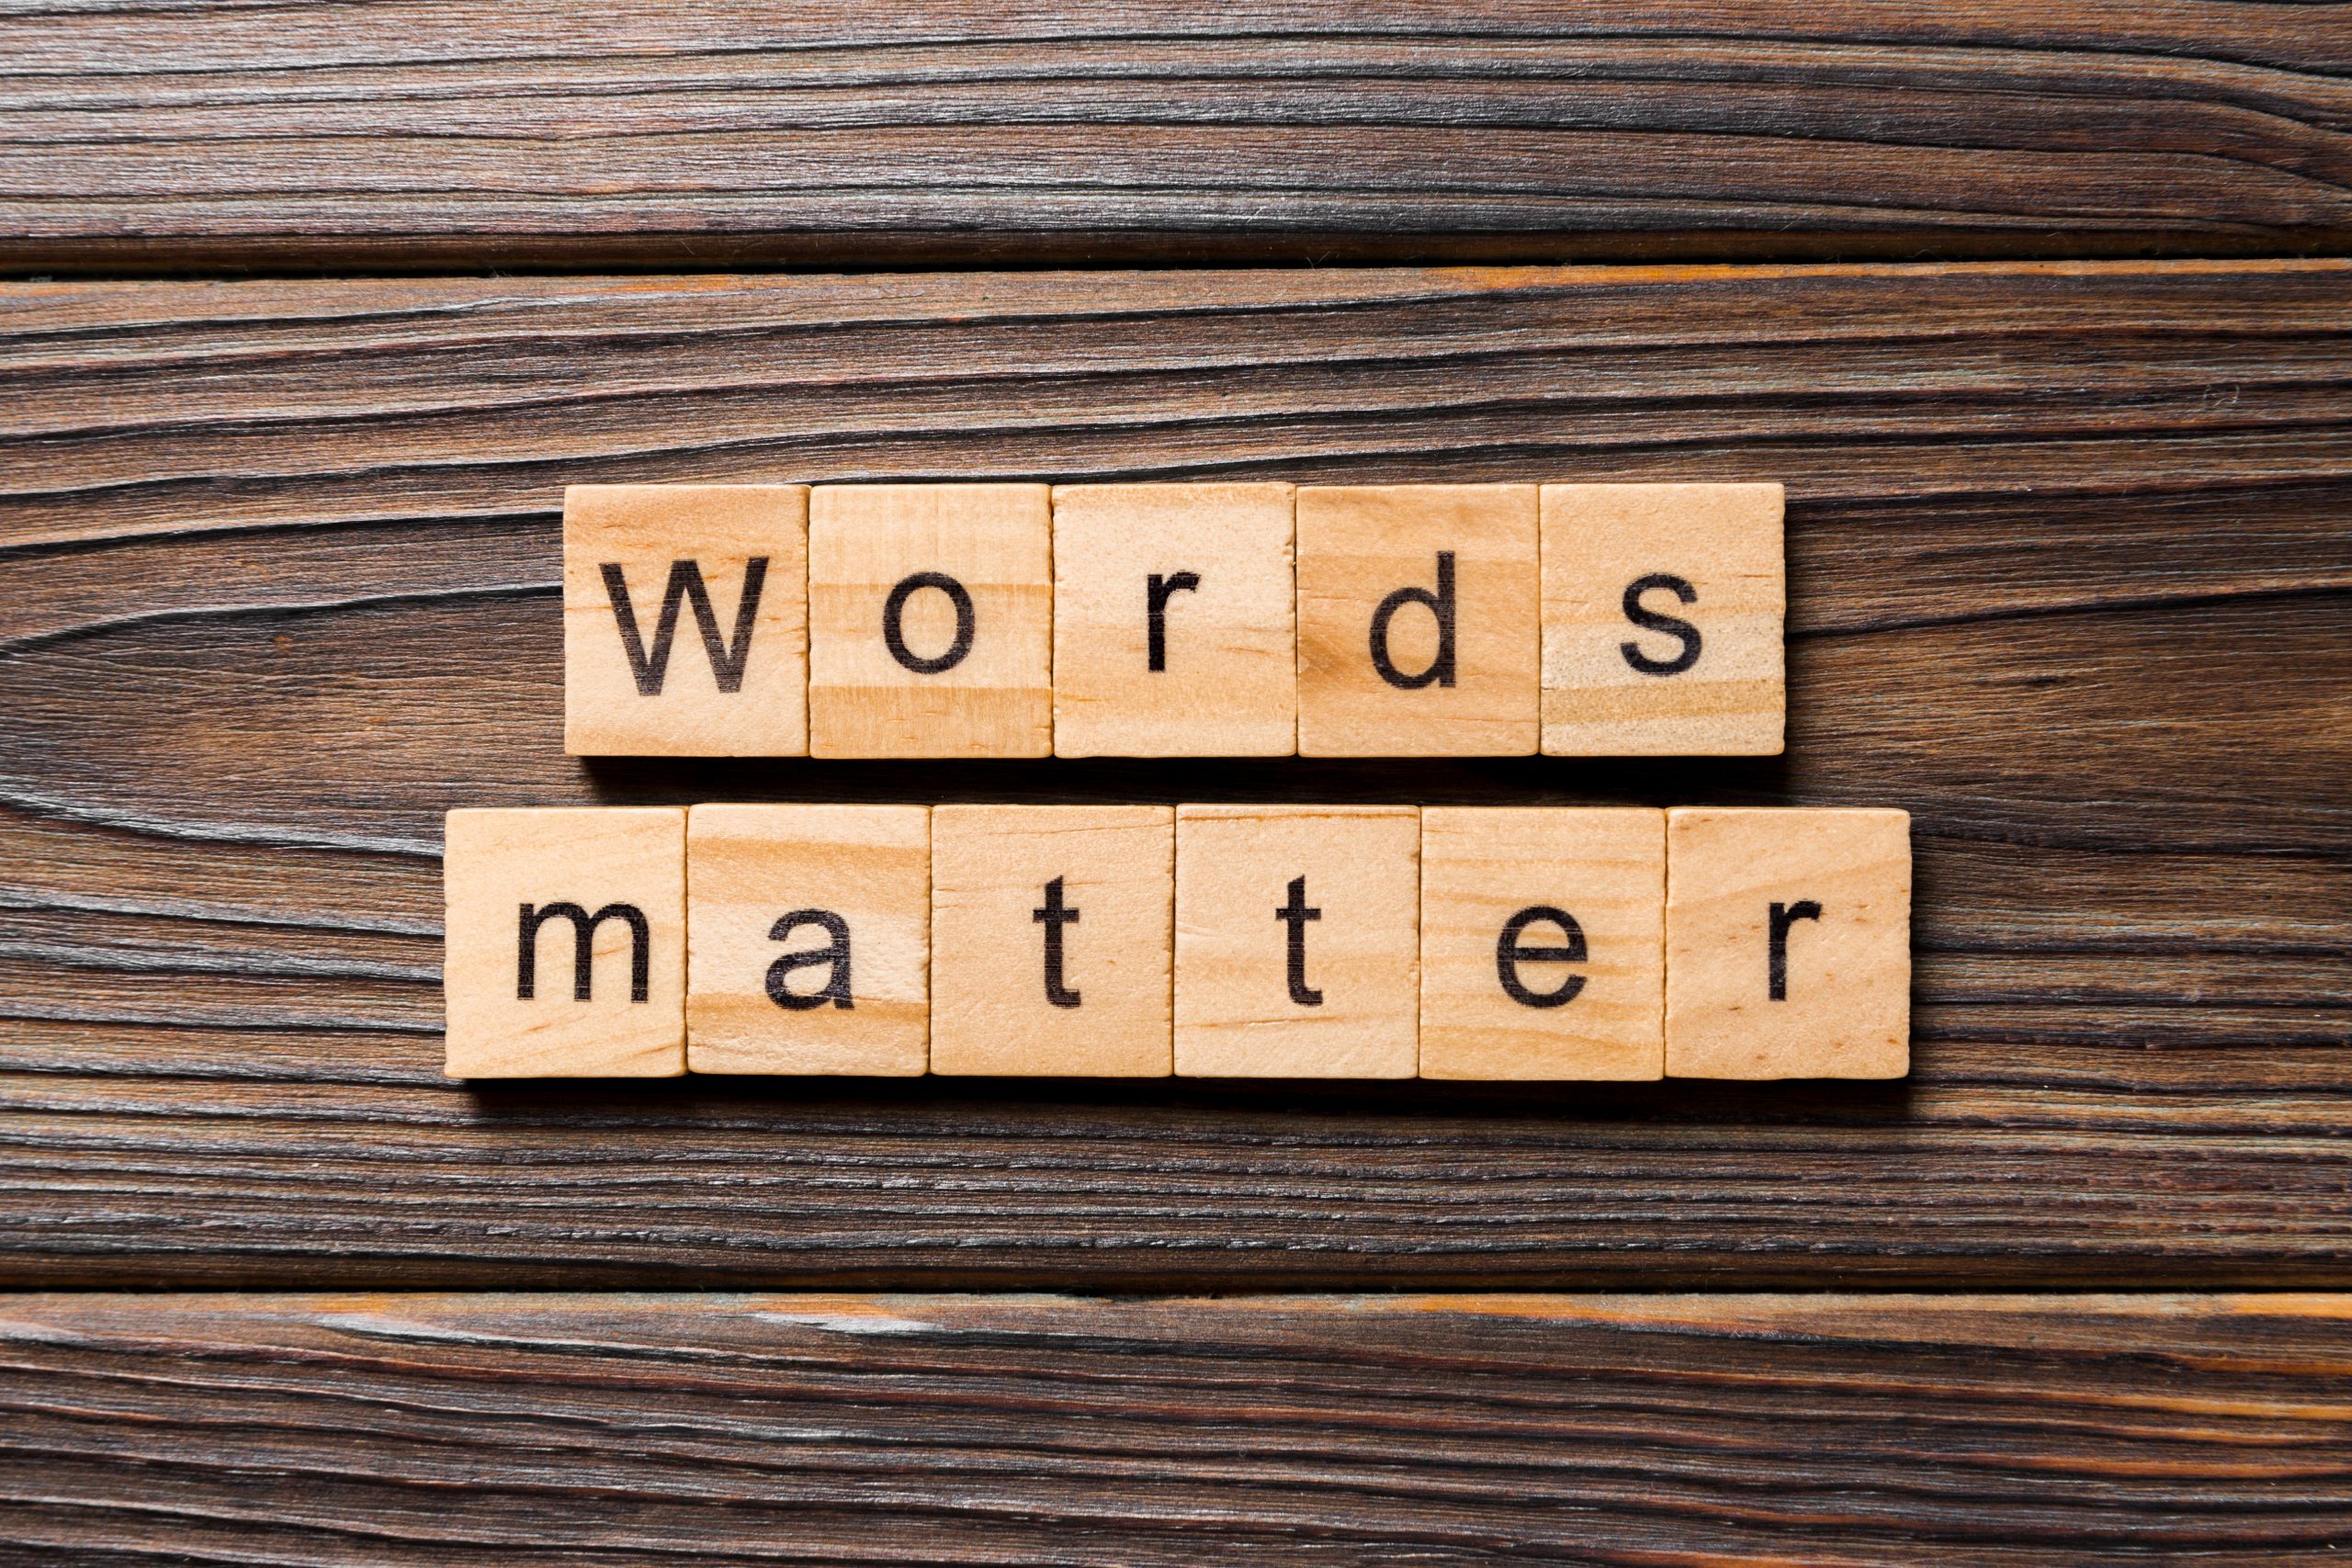 "Words matter" on wood block. Words matters text on table